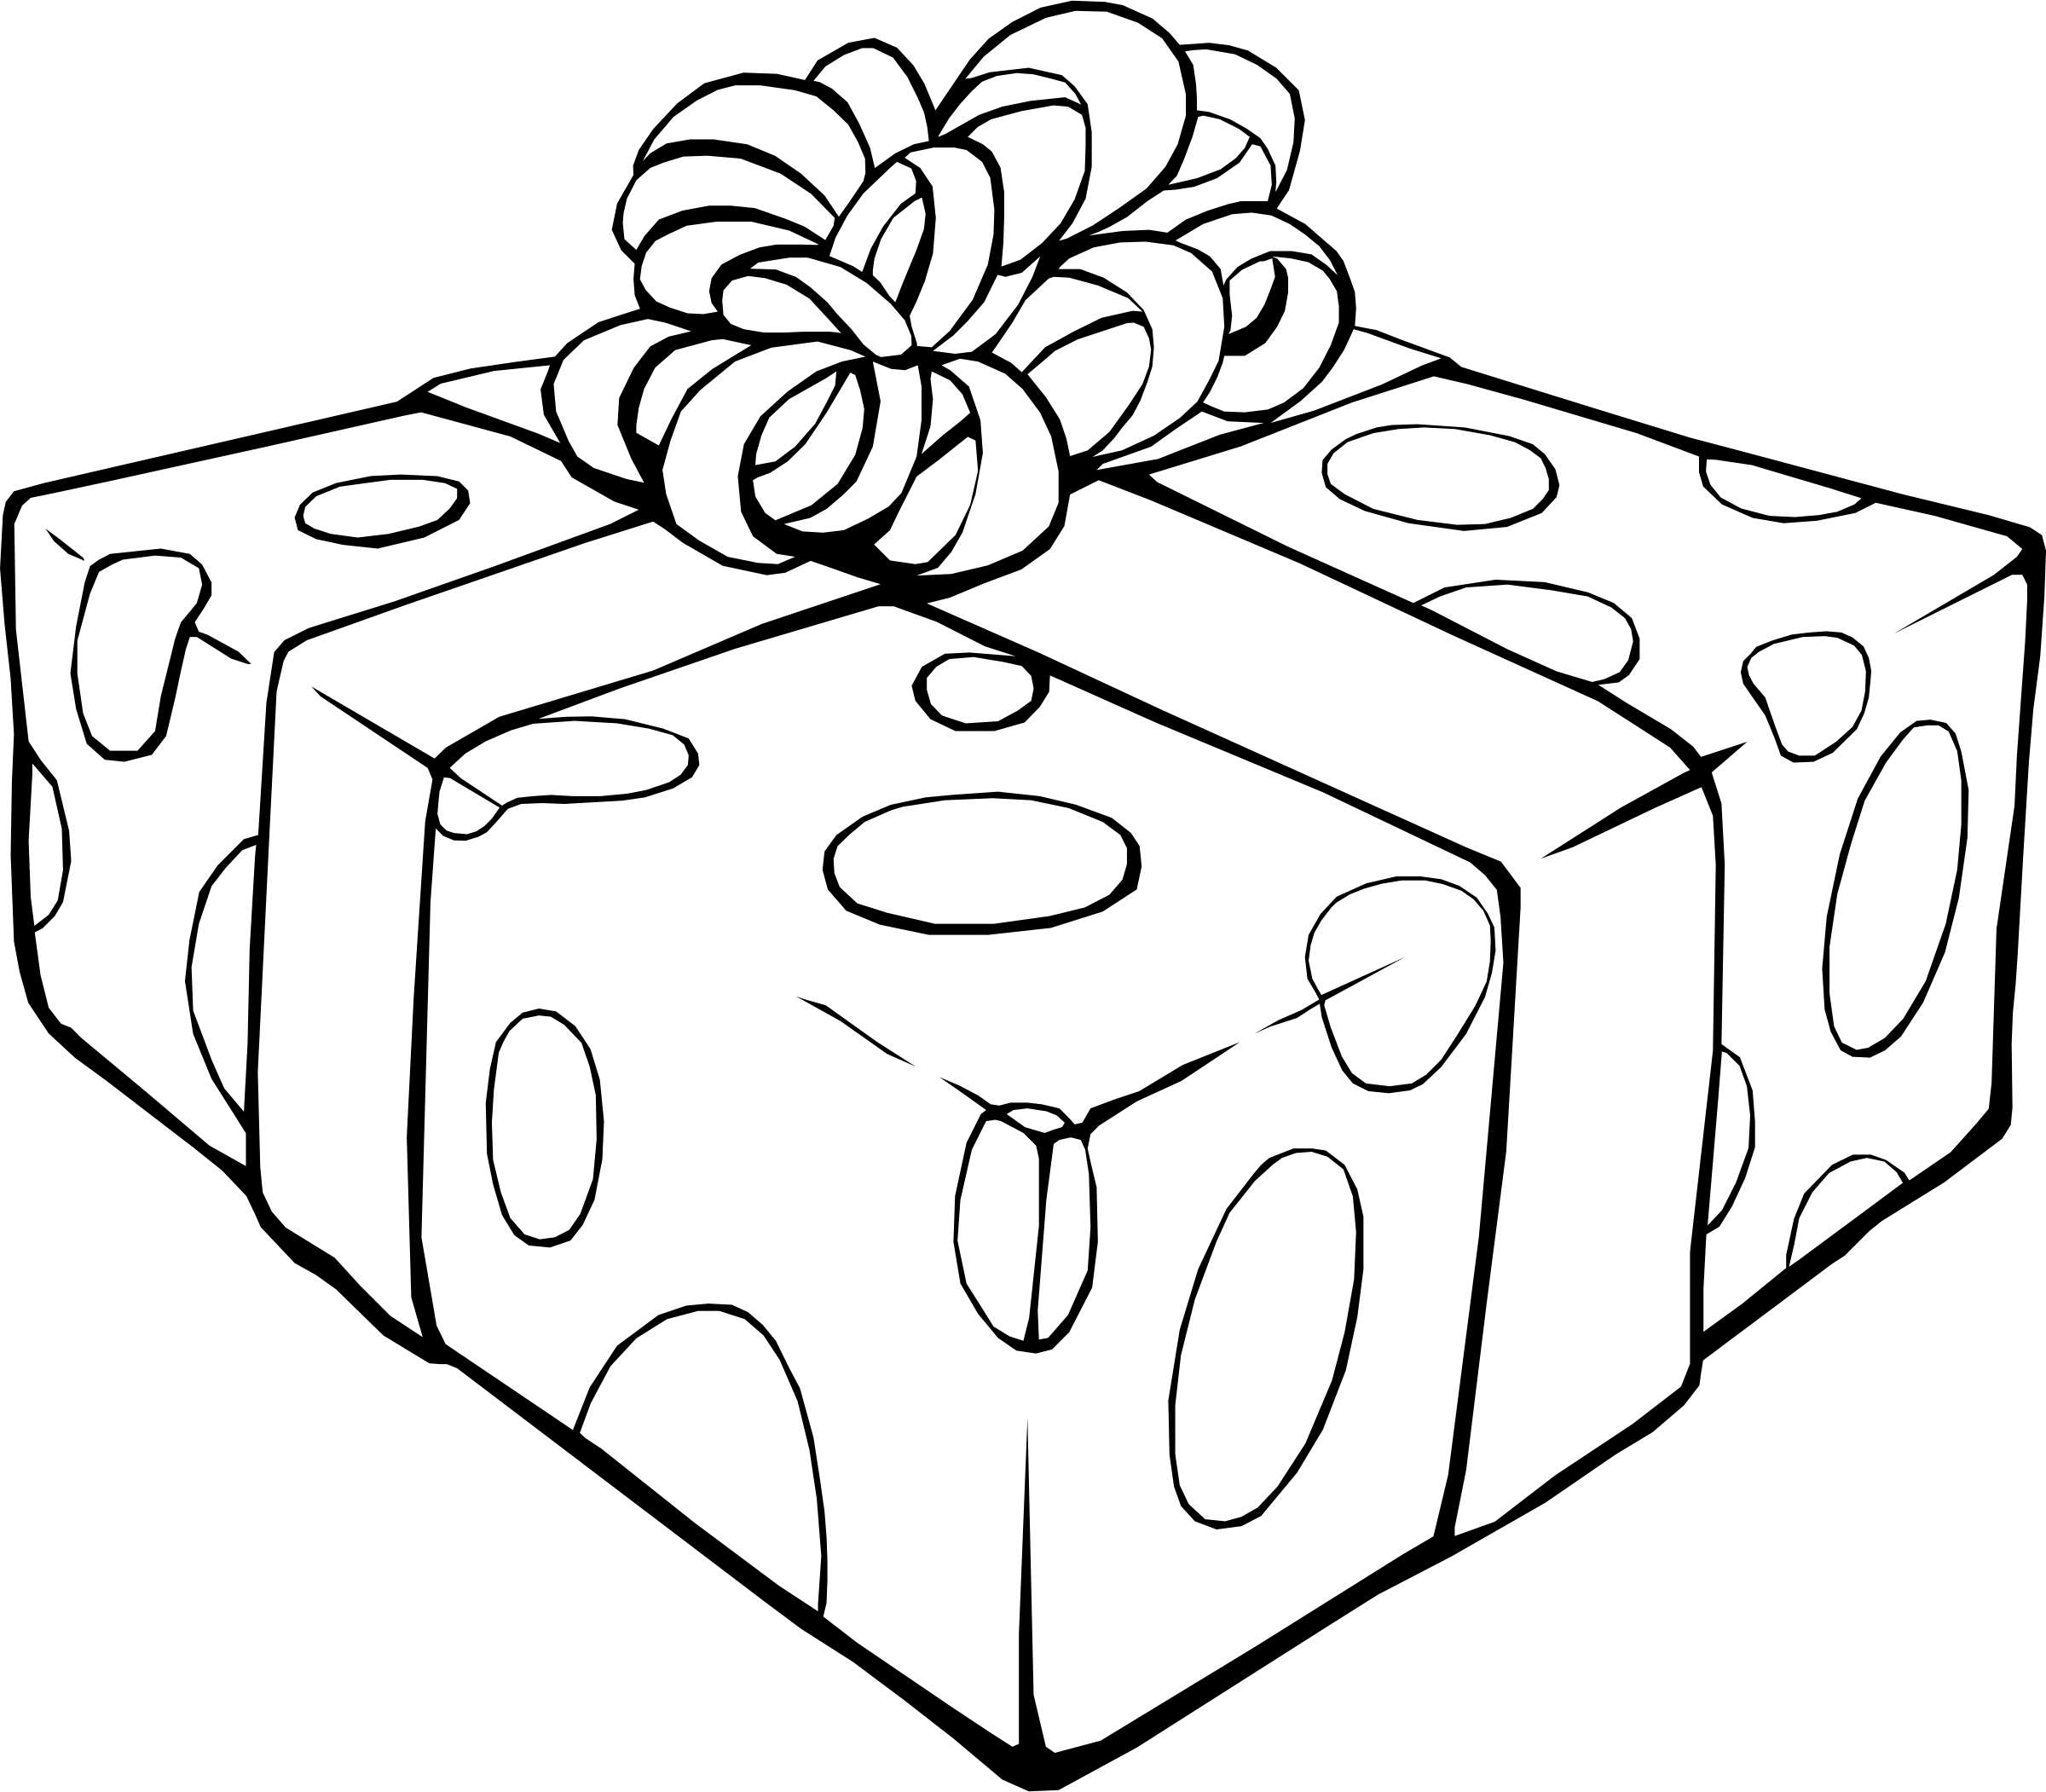 Birthday present drawing at. Gift clipart outline